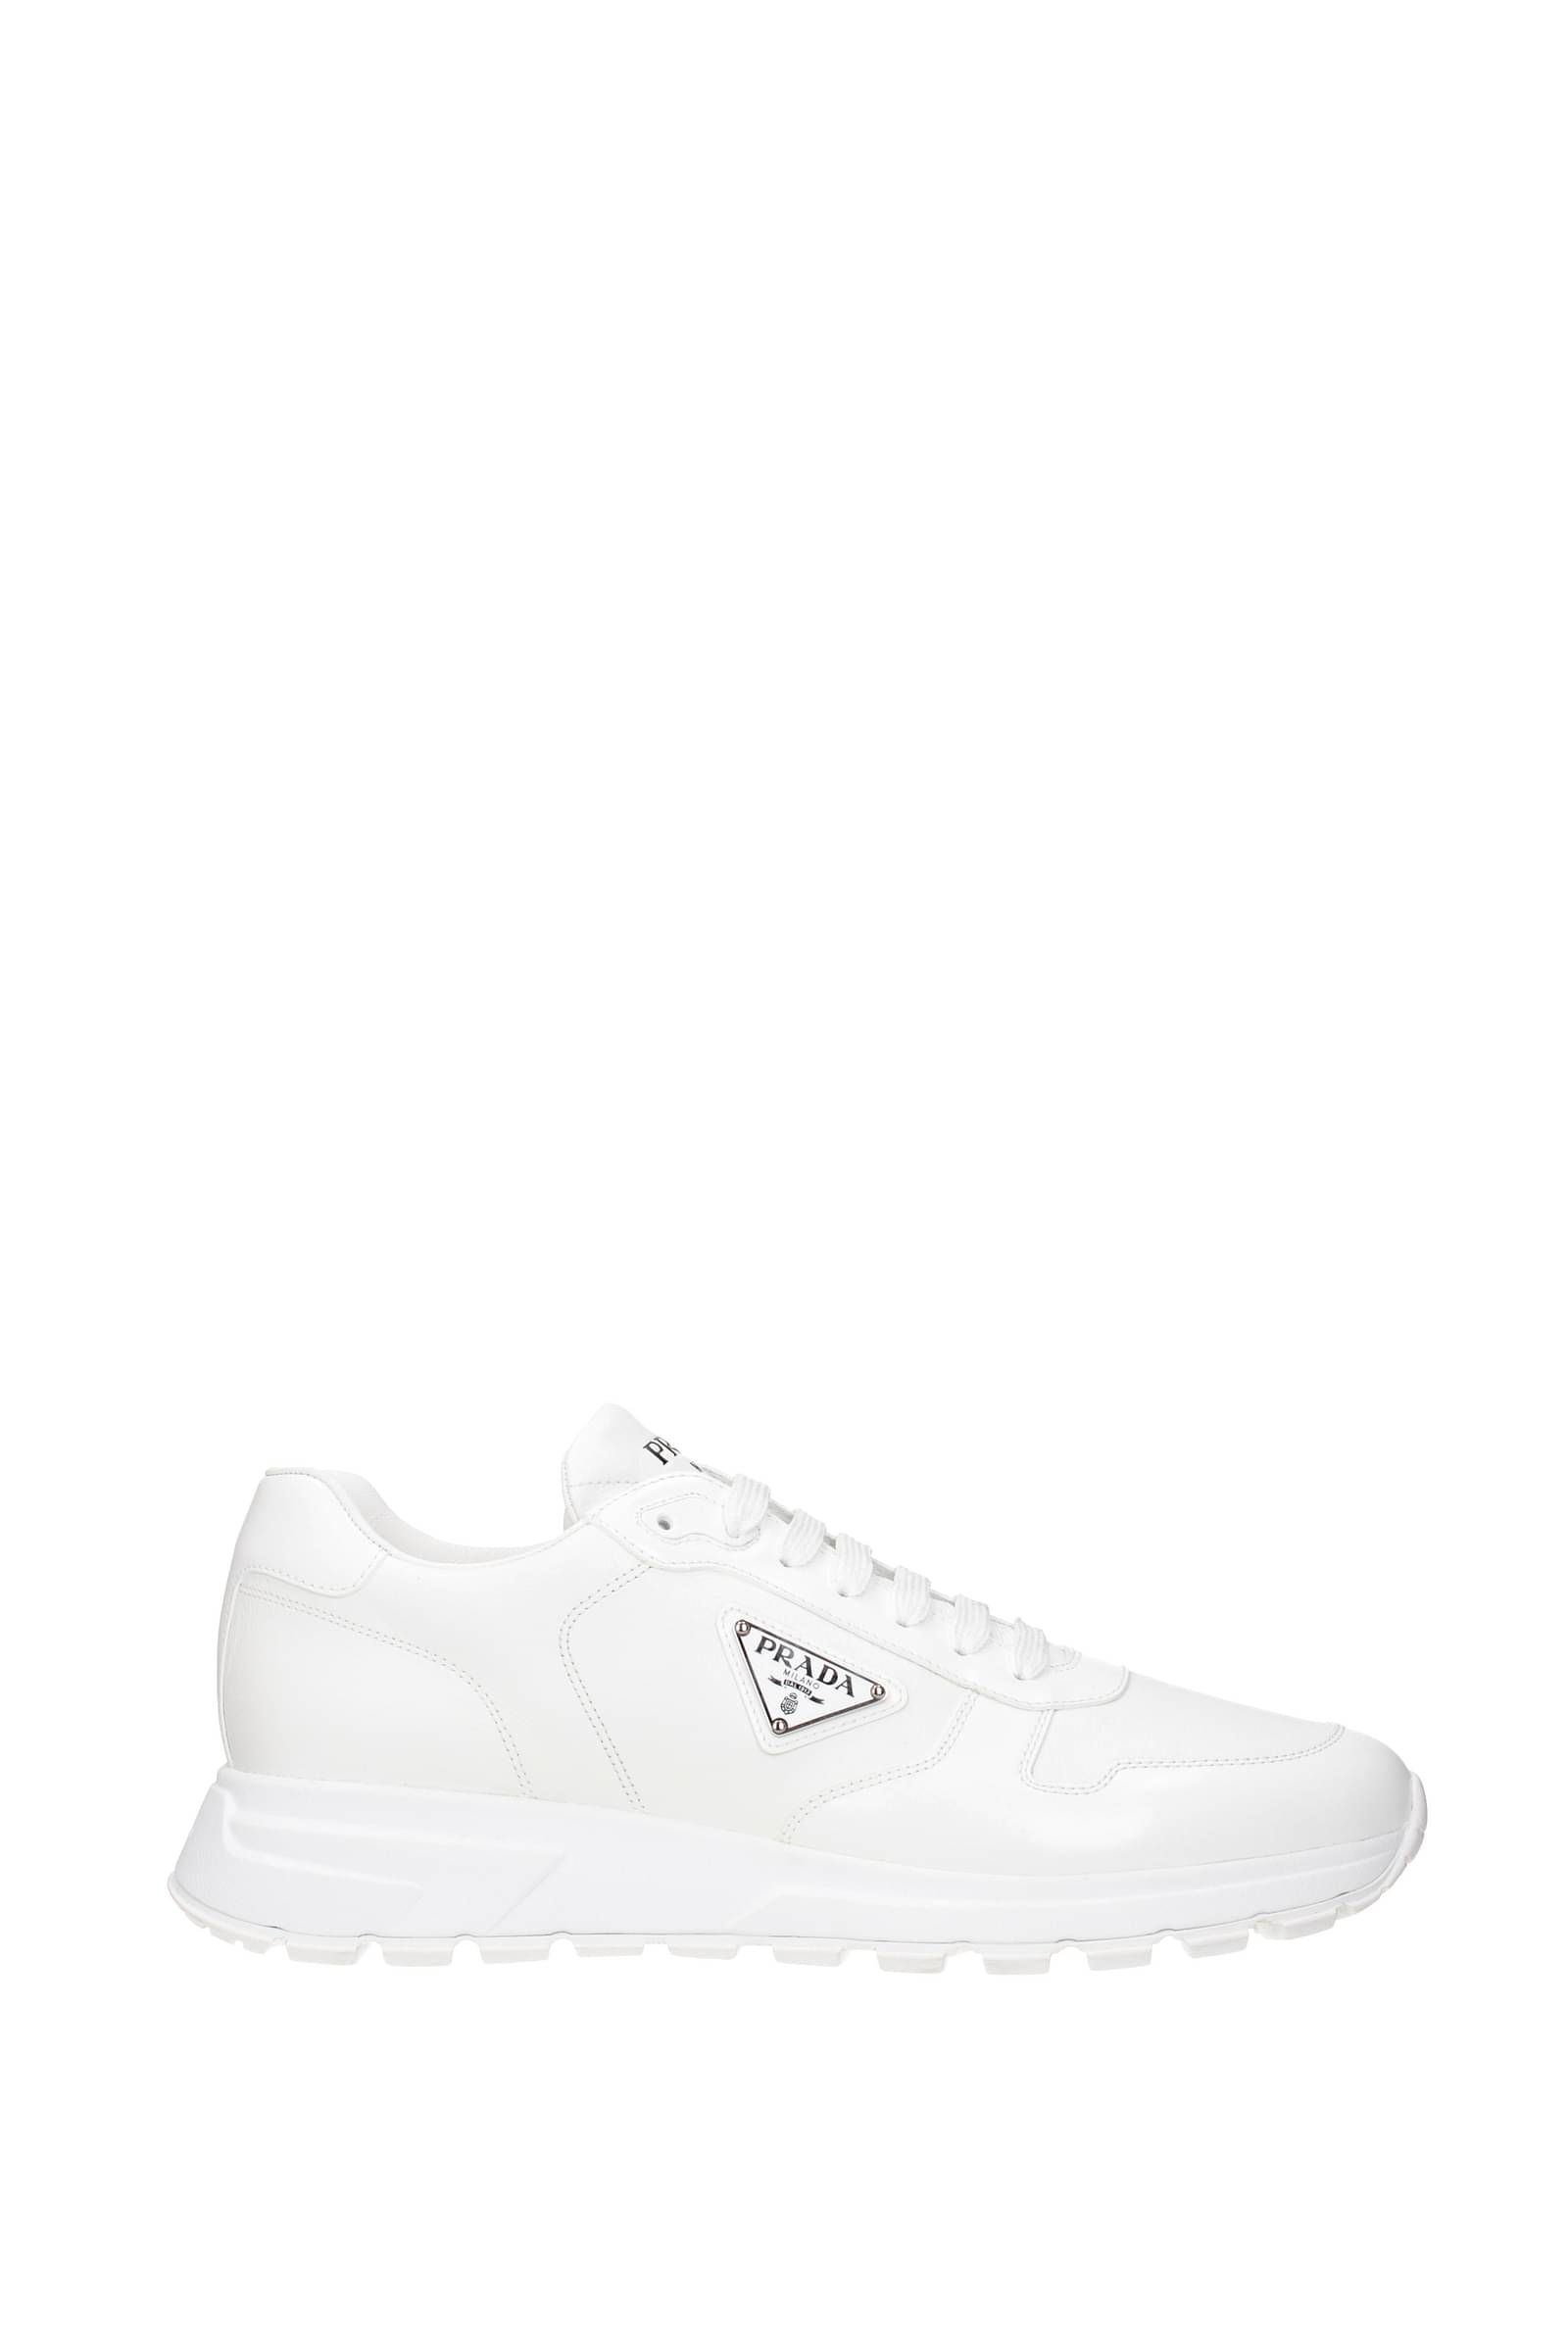 Prada Sneakers - Men's 8 | Fashionably Yours